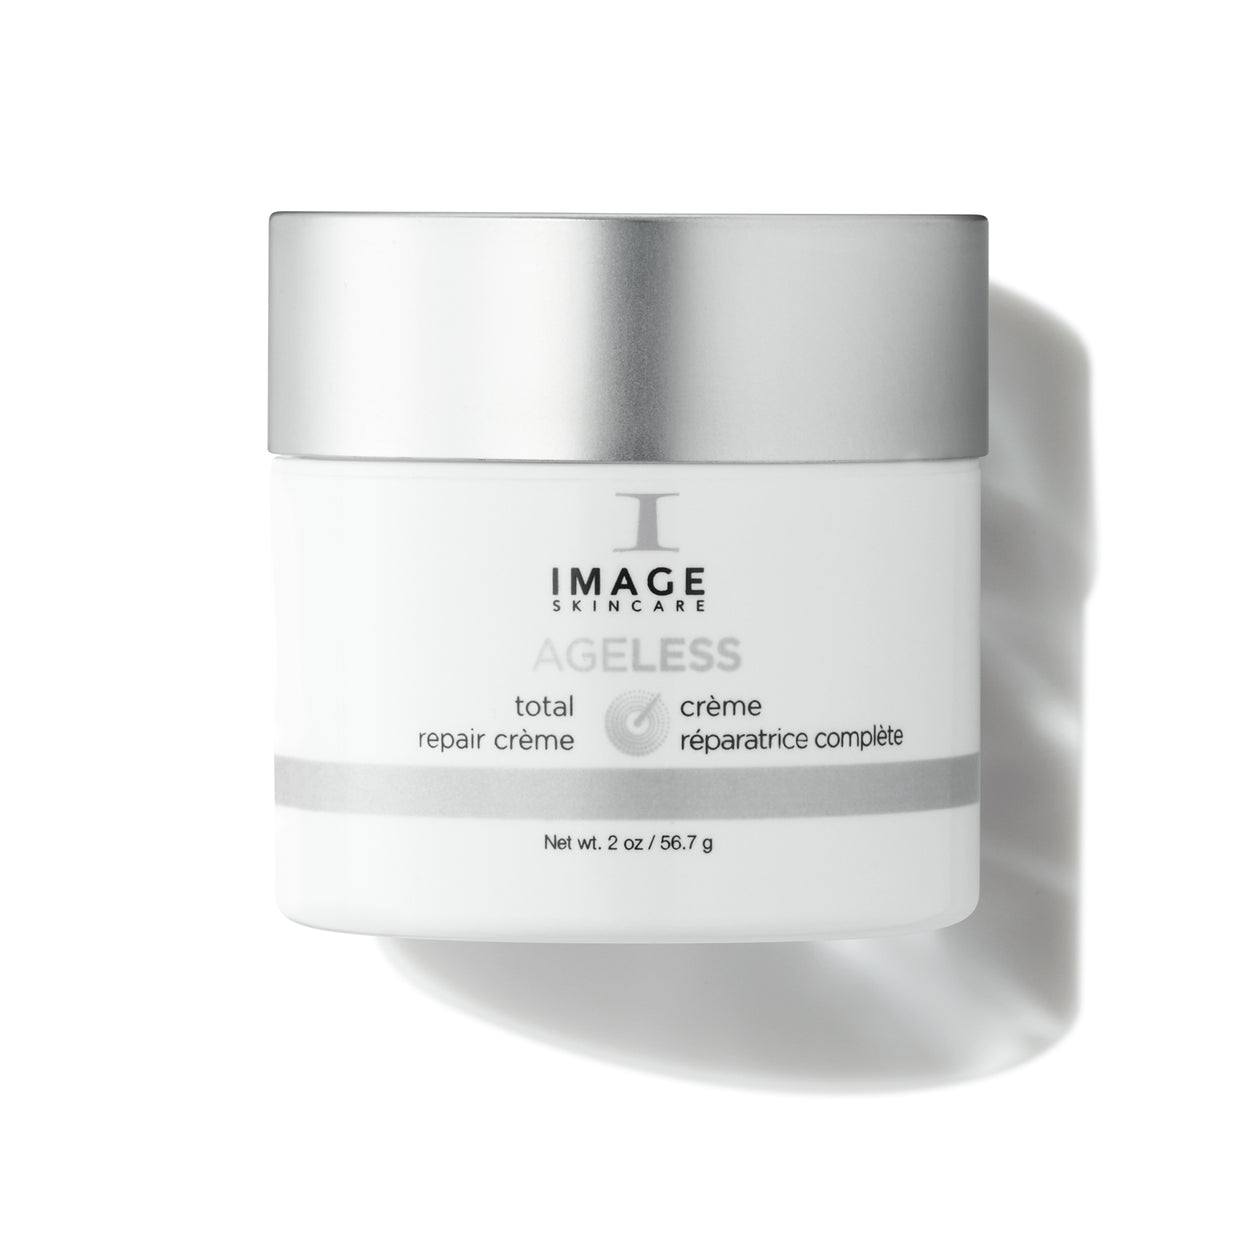 Image Skincare Ageless Total Repair Creme Shop At Exclusive Beauty